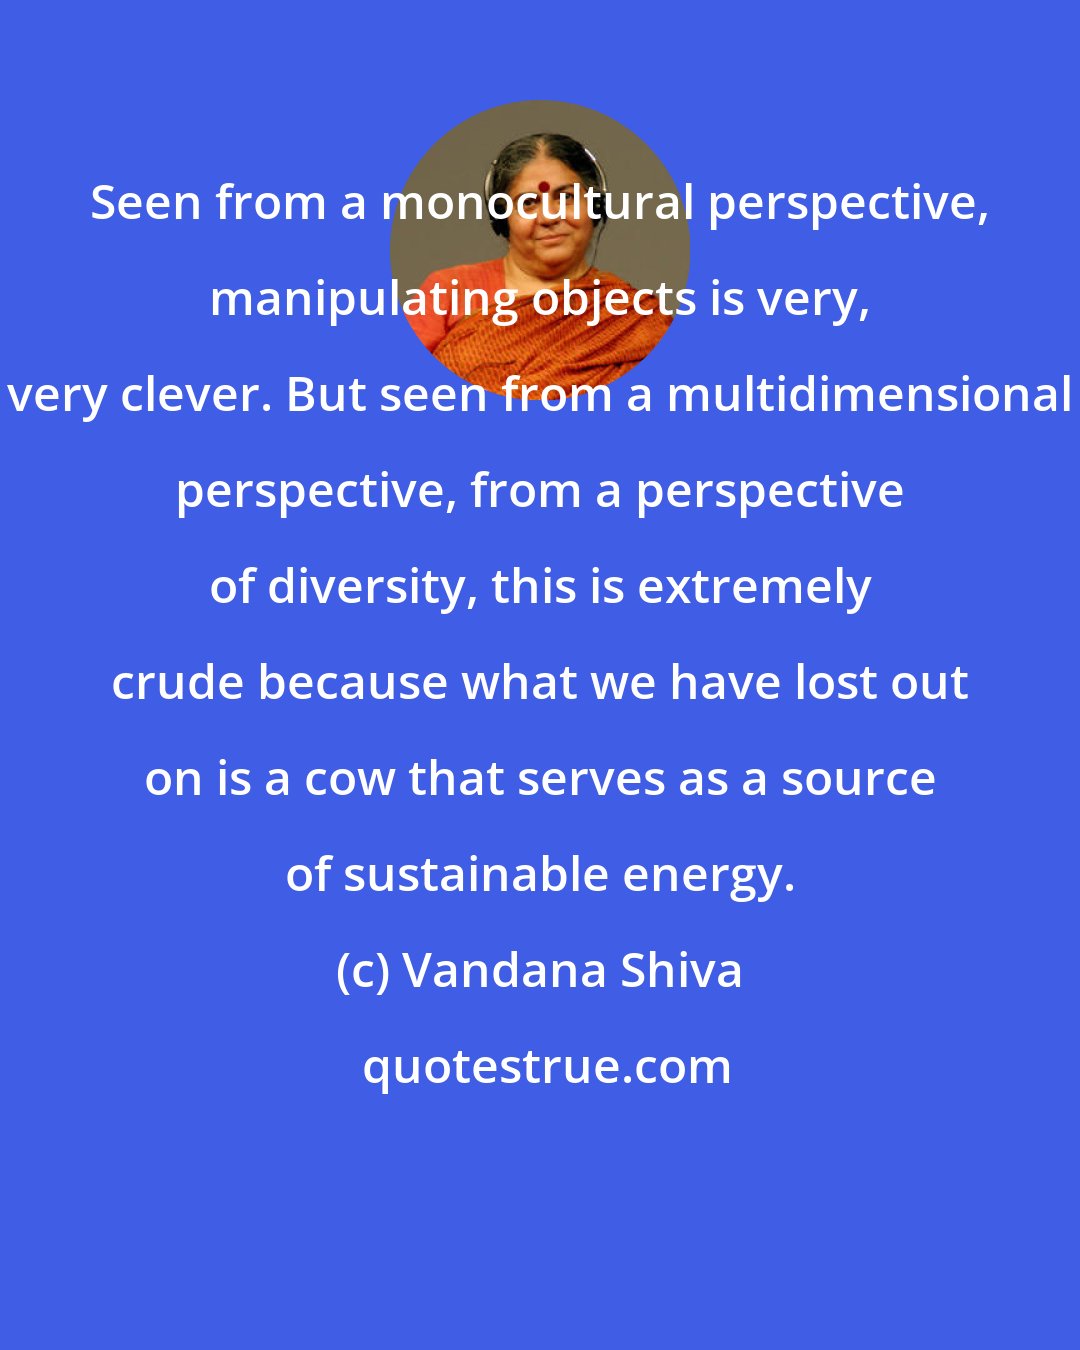 Vandana Shiva: Seen from a monocultural perspective, manipulating objects is very, very clever. But seen from a multidimensional perspective, from a perspective of diversity, this is extremely crude because what we have lost out on is a cow that serves as a source of sustainable energy.